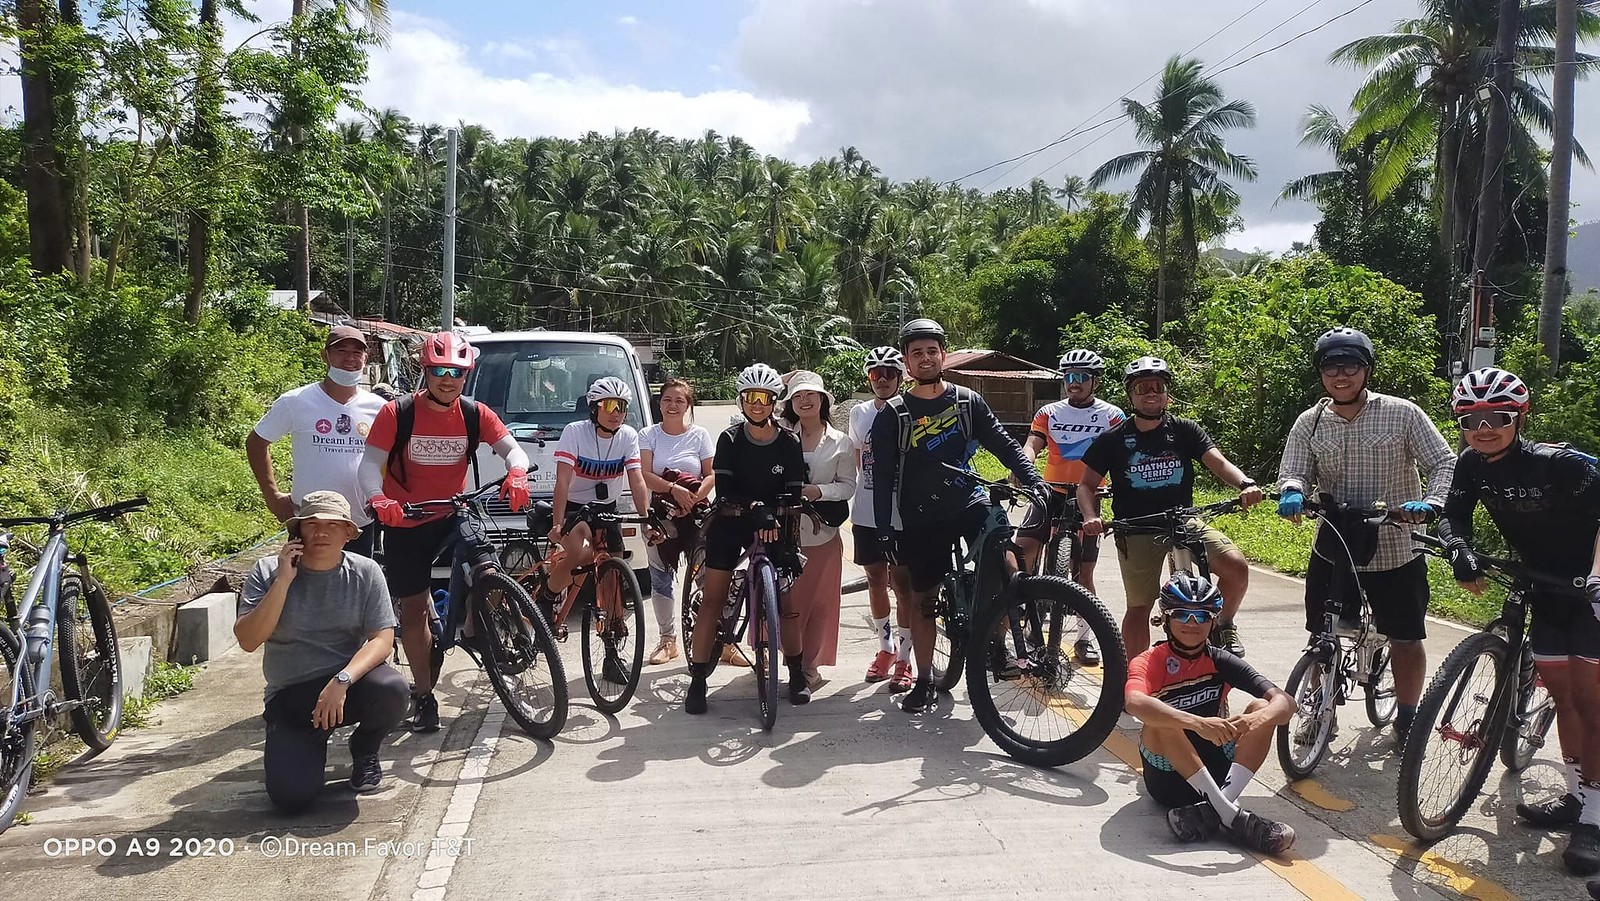 The group's start of the ride for Luzon Datum at Argao